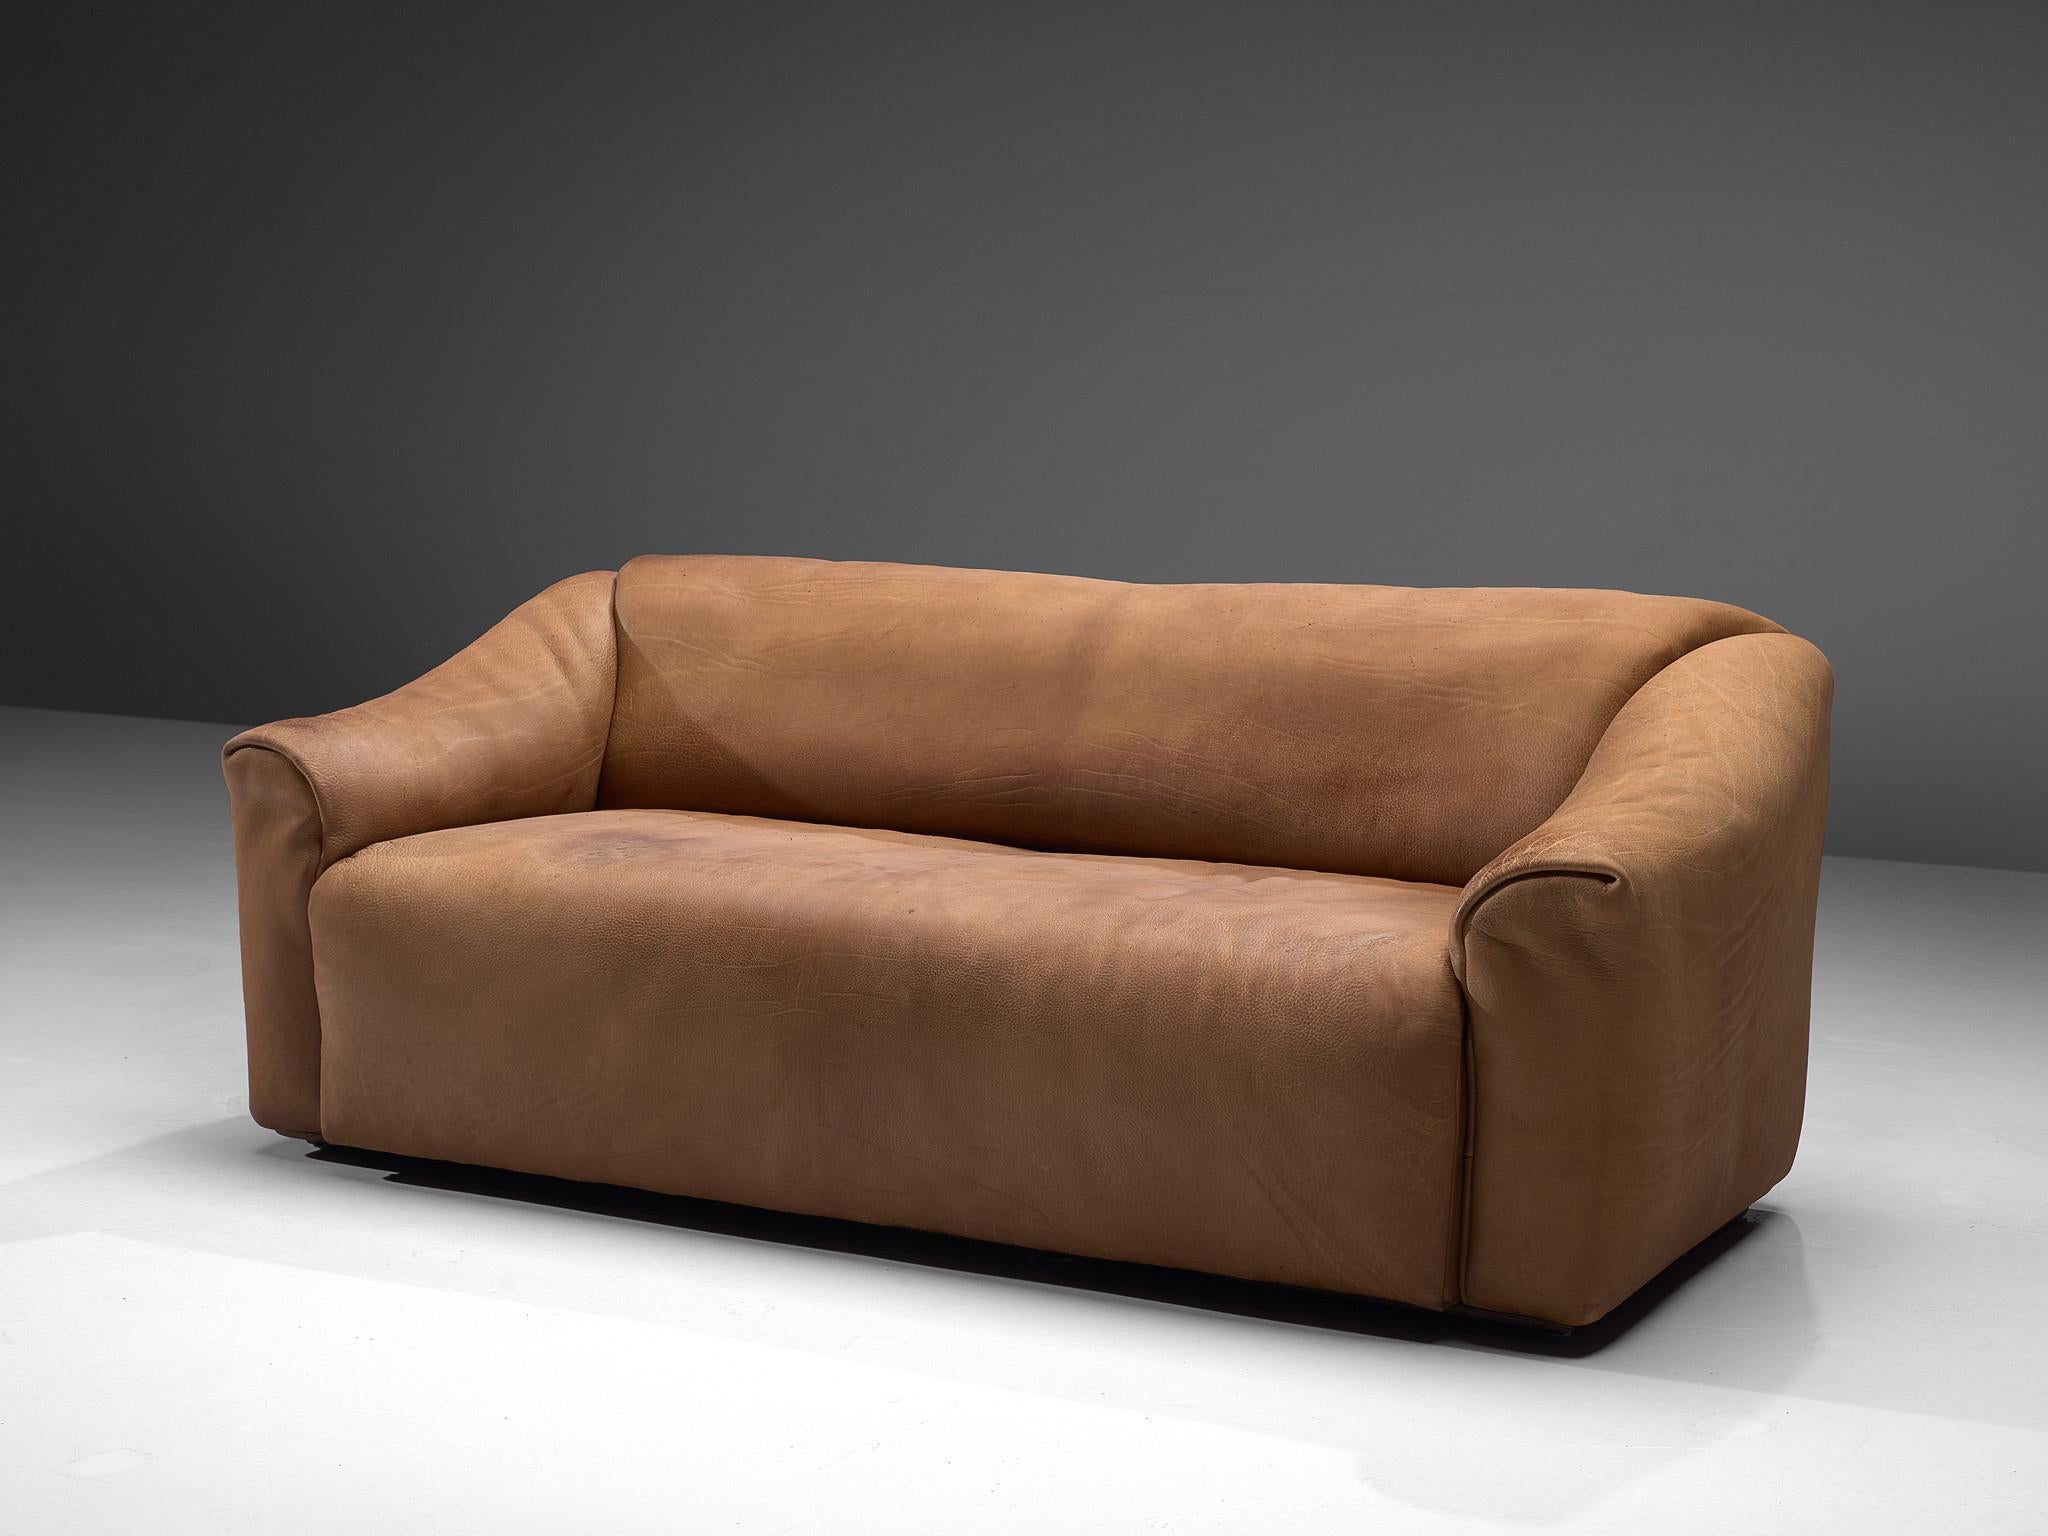 De Sede, DS-47 two-seat sofa, leather, Switzerland, 1960s.

Highly comfortable DS47 sofa in light cognac leather by De Sede. The design is simplistic, yet very modern. A tight and cubic outside with a soft and curved inside, which emphasize the